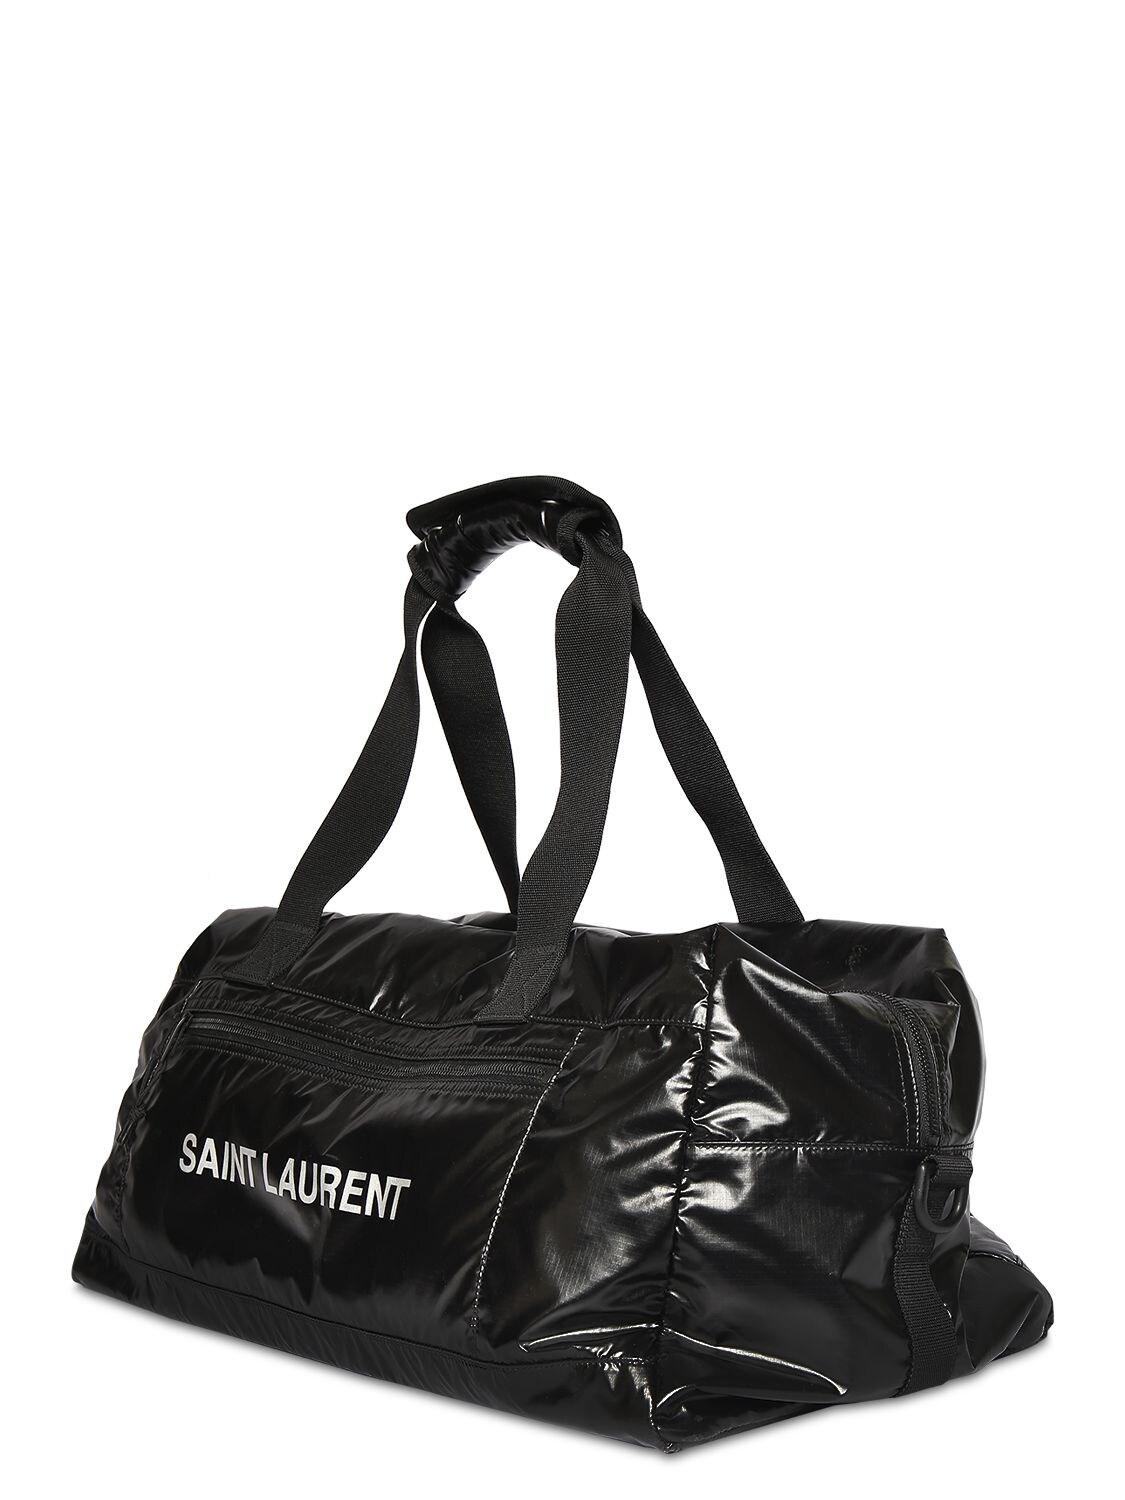 Saint Laurent Synthetic Metallised Nylon Nuxx Duffle Bag in Silver Metallic for Men Mens Bags Gym bags and sports bags 